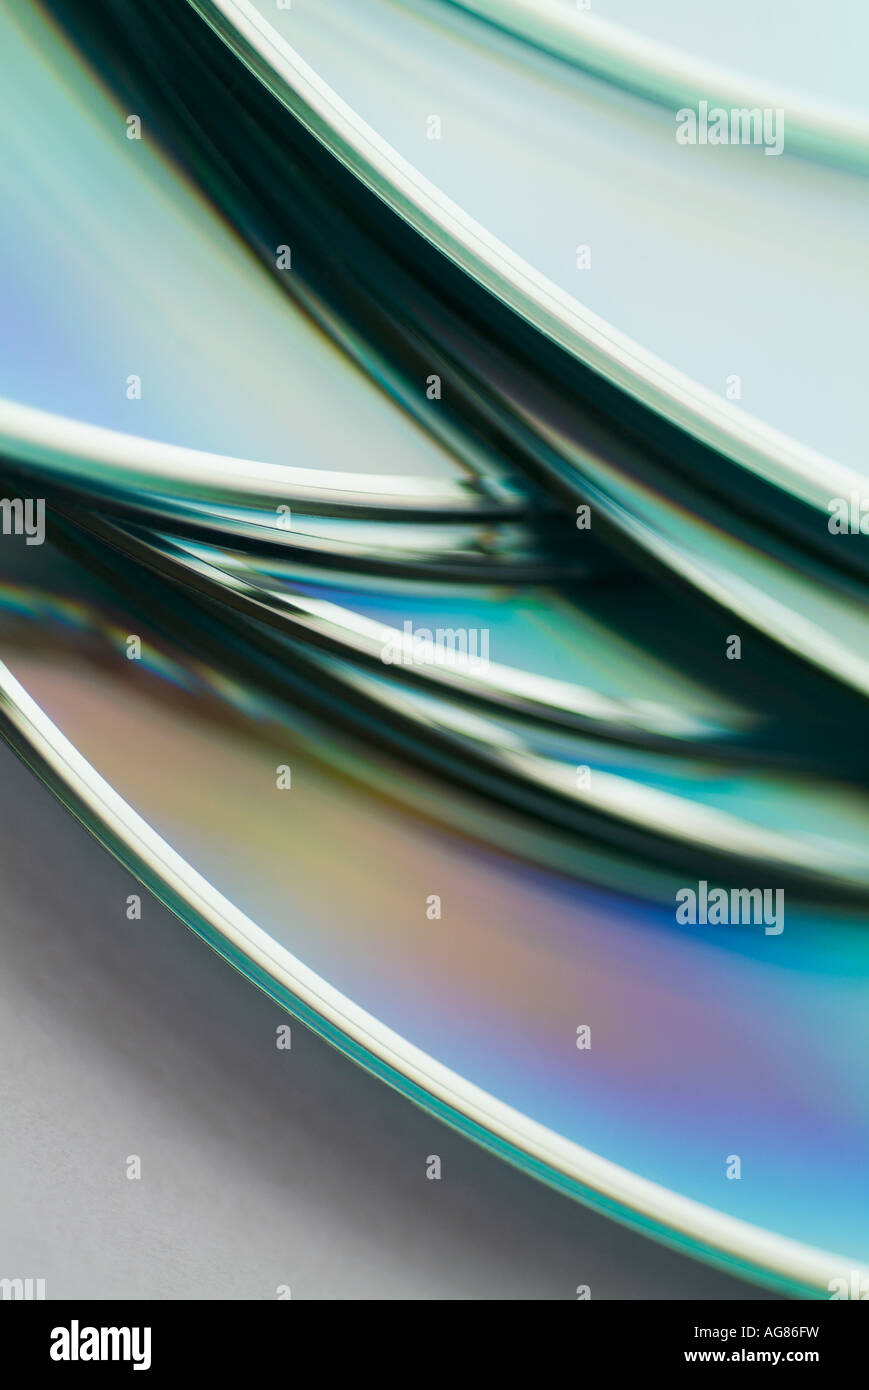 Stack of CD's Stock Photo